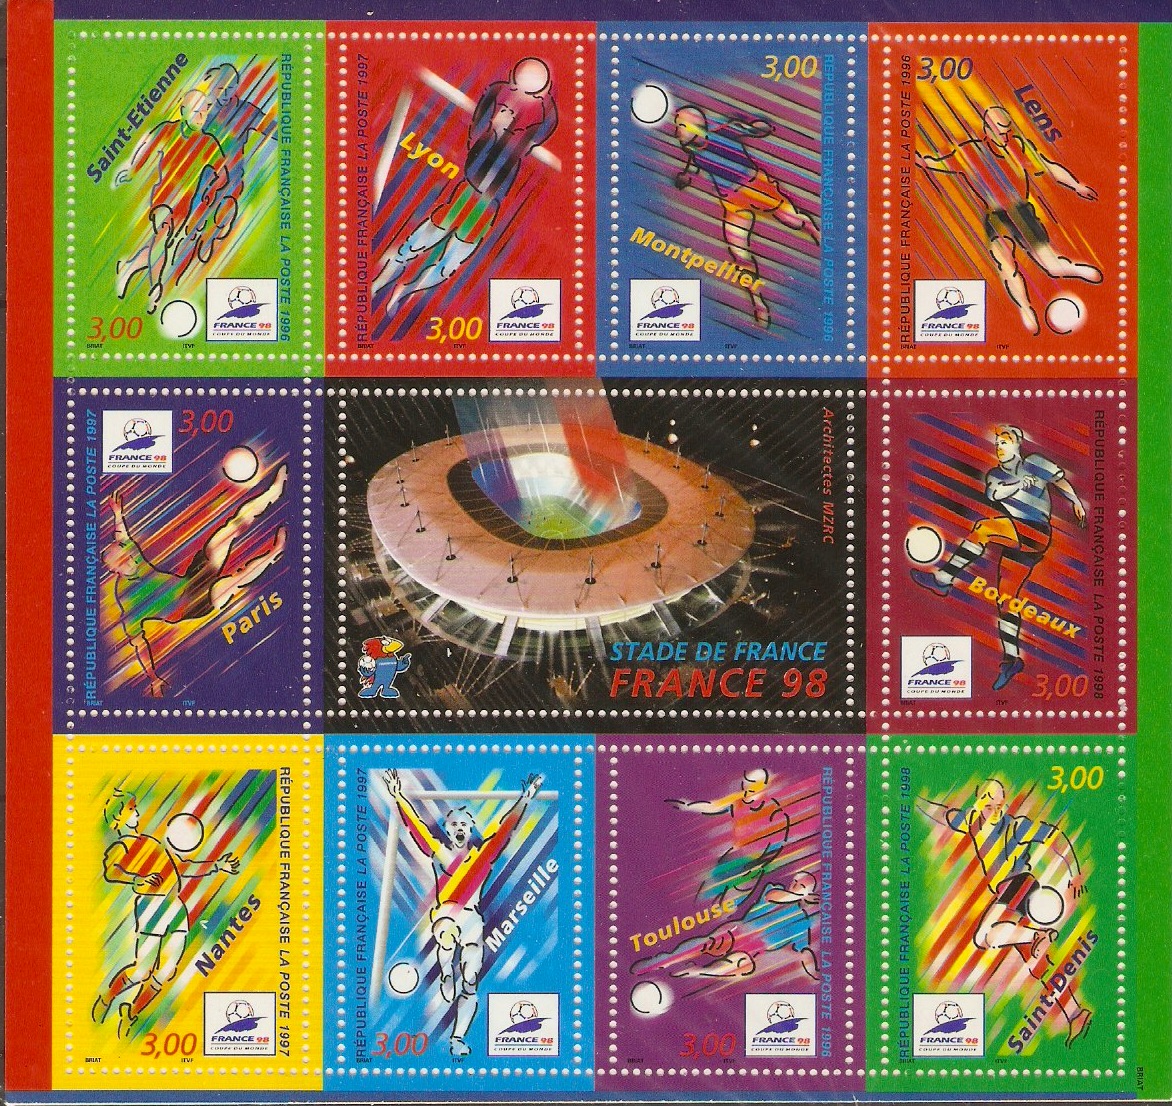 France 1998 World Cup Football Stamps Sheet. SGMS3466.